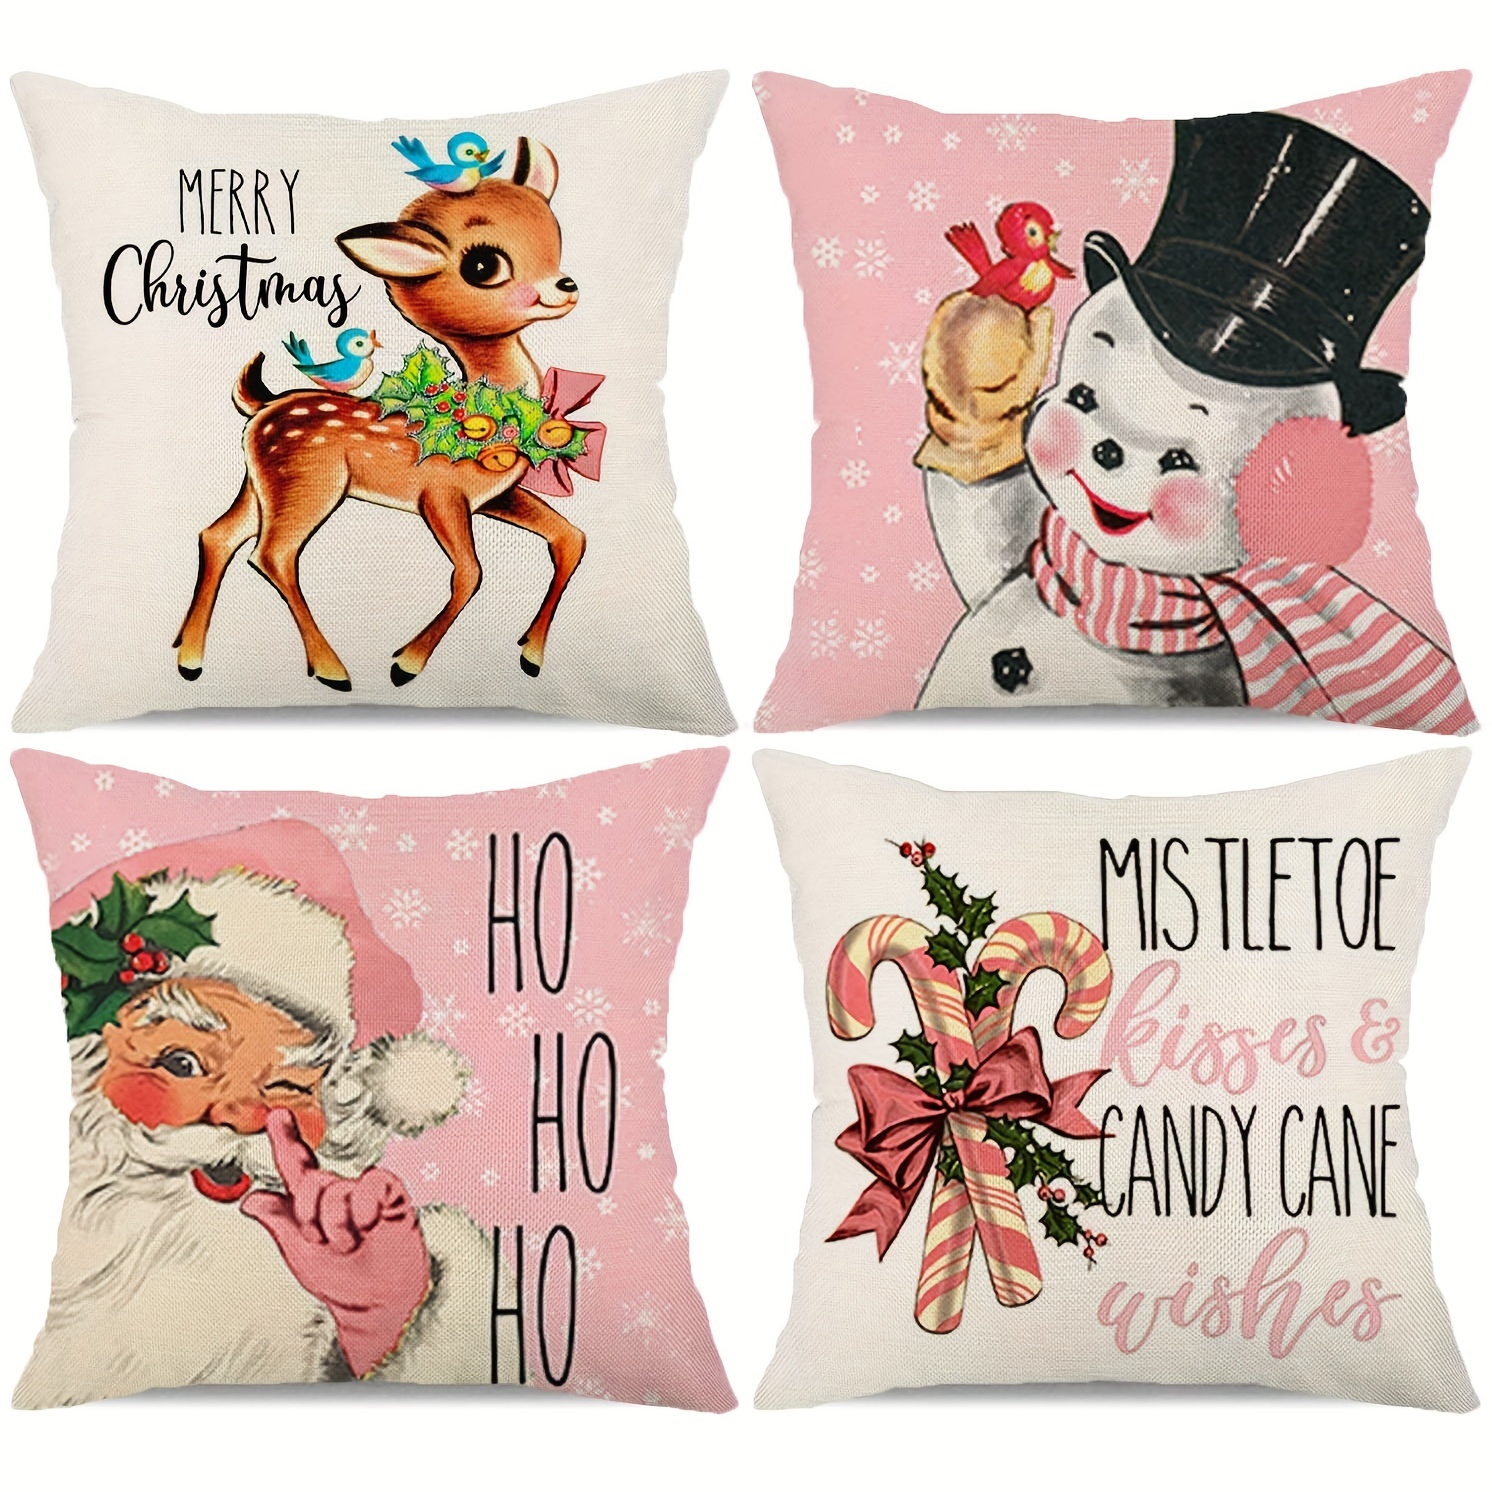 Oh Susannah Christmas Story Throw Pillow Cover Set (Two 18 by 18 inch Pillow Cover) A Christmas Story Decorations Gifts